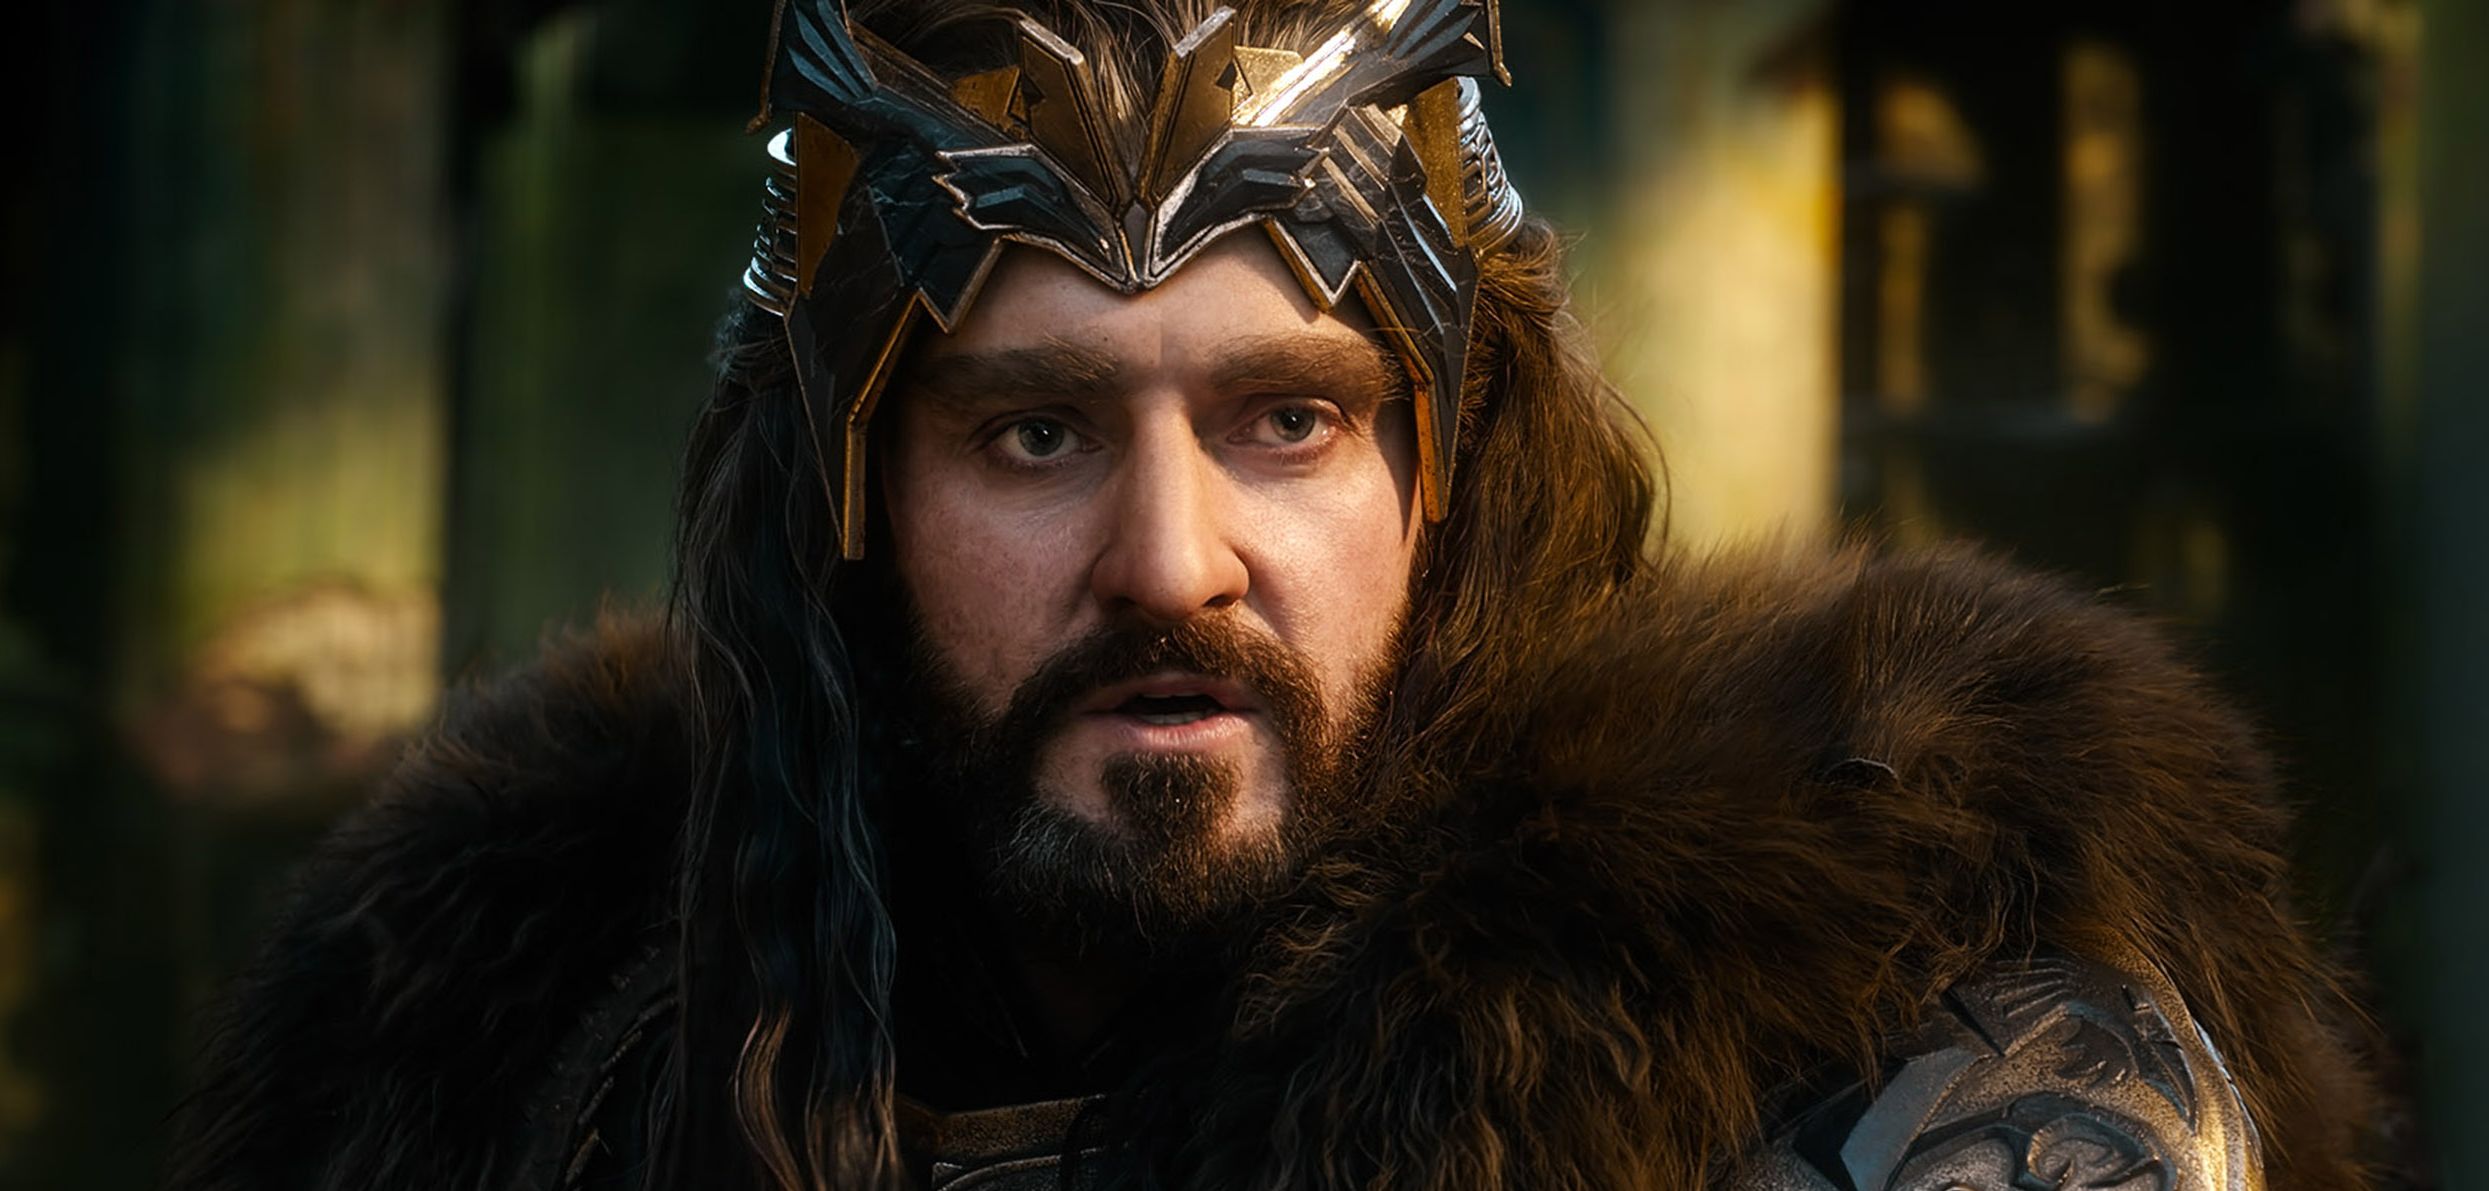 Thorin Oakenshield close-up in The Battle of the Five Armies